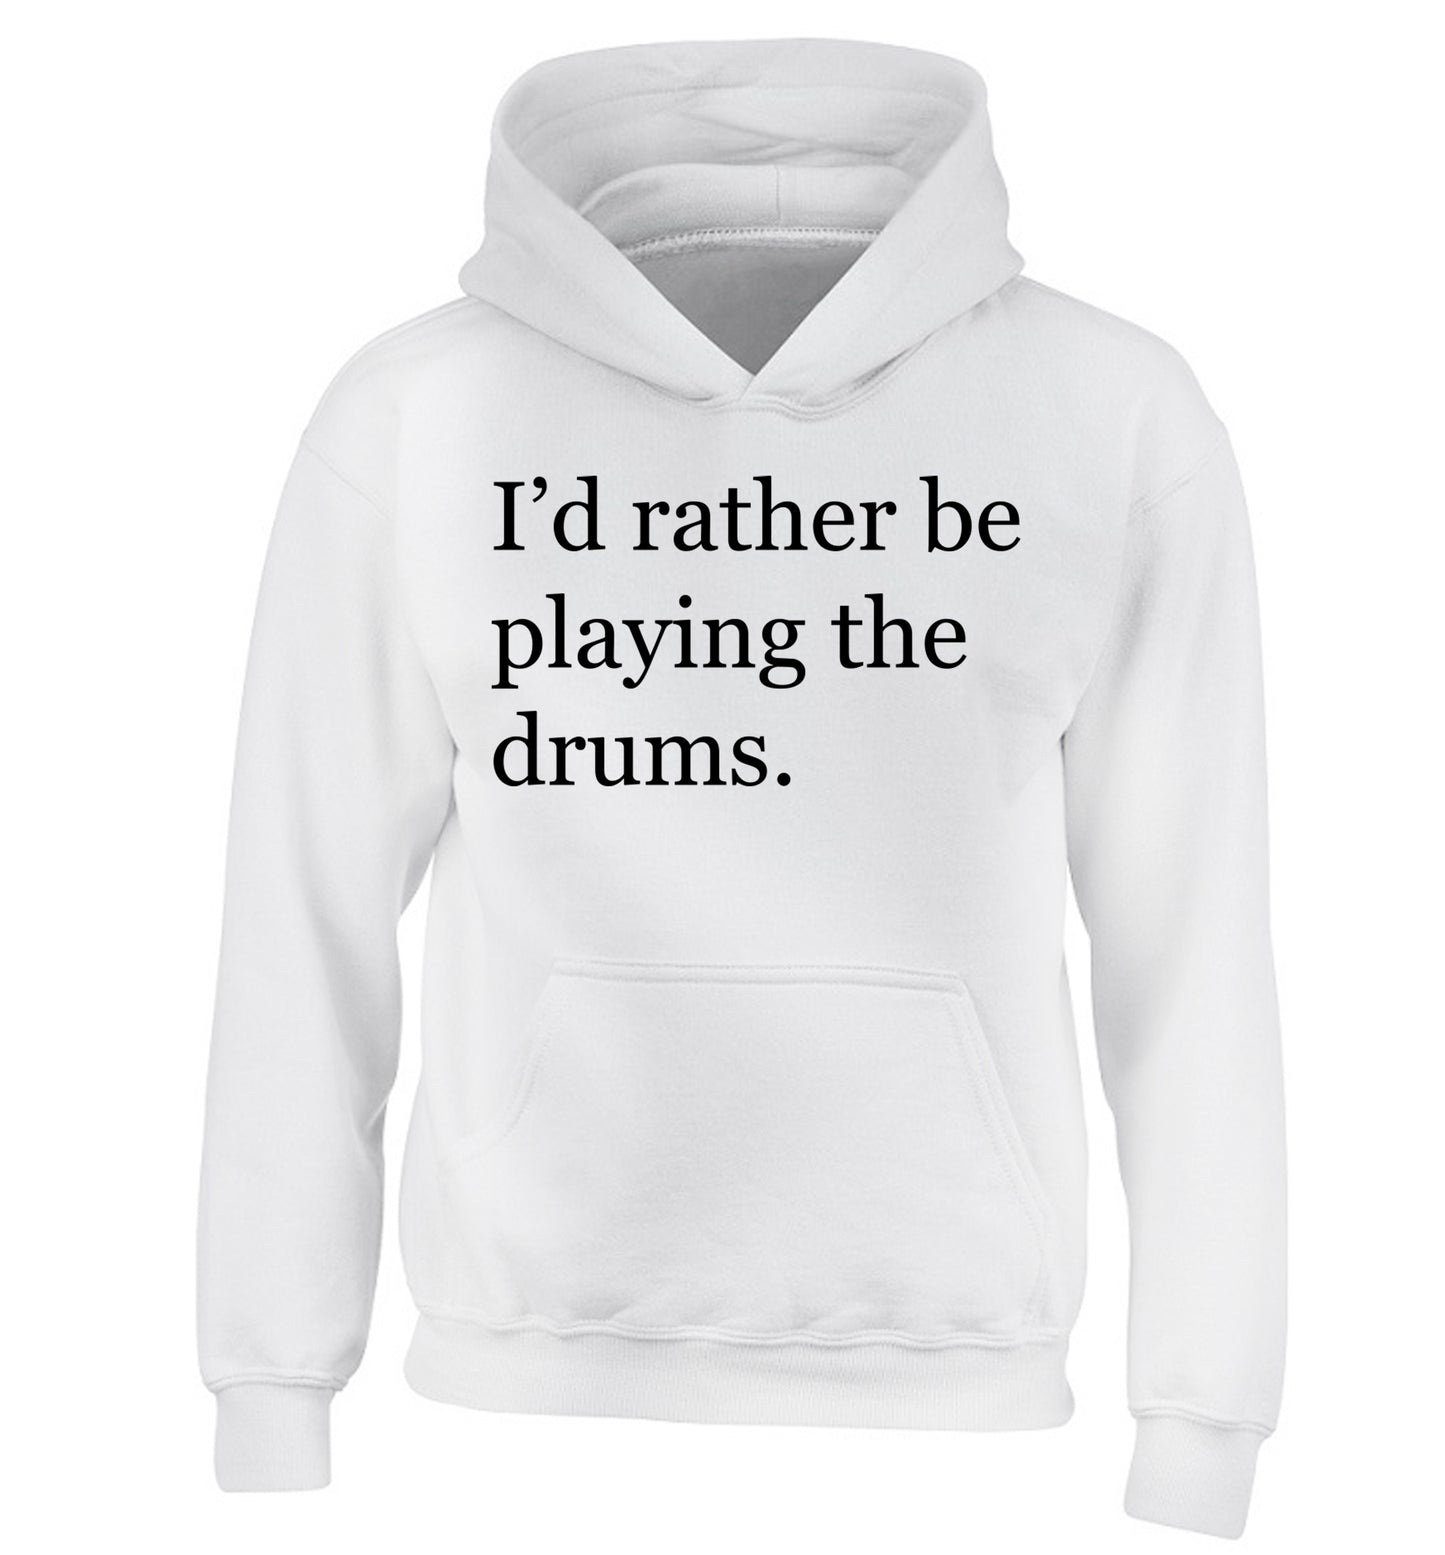 I'd rather be playing the drums children's white hoodie 12-14 Years